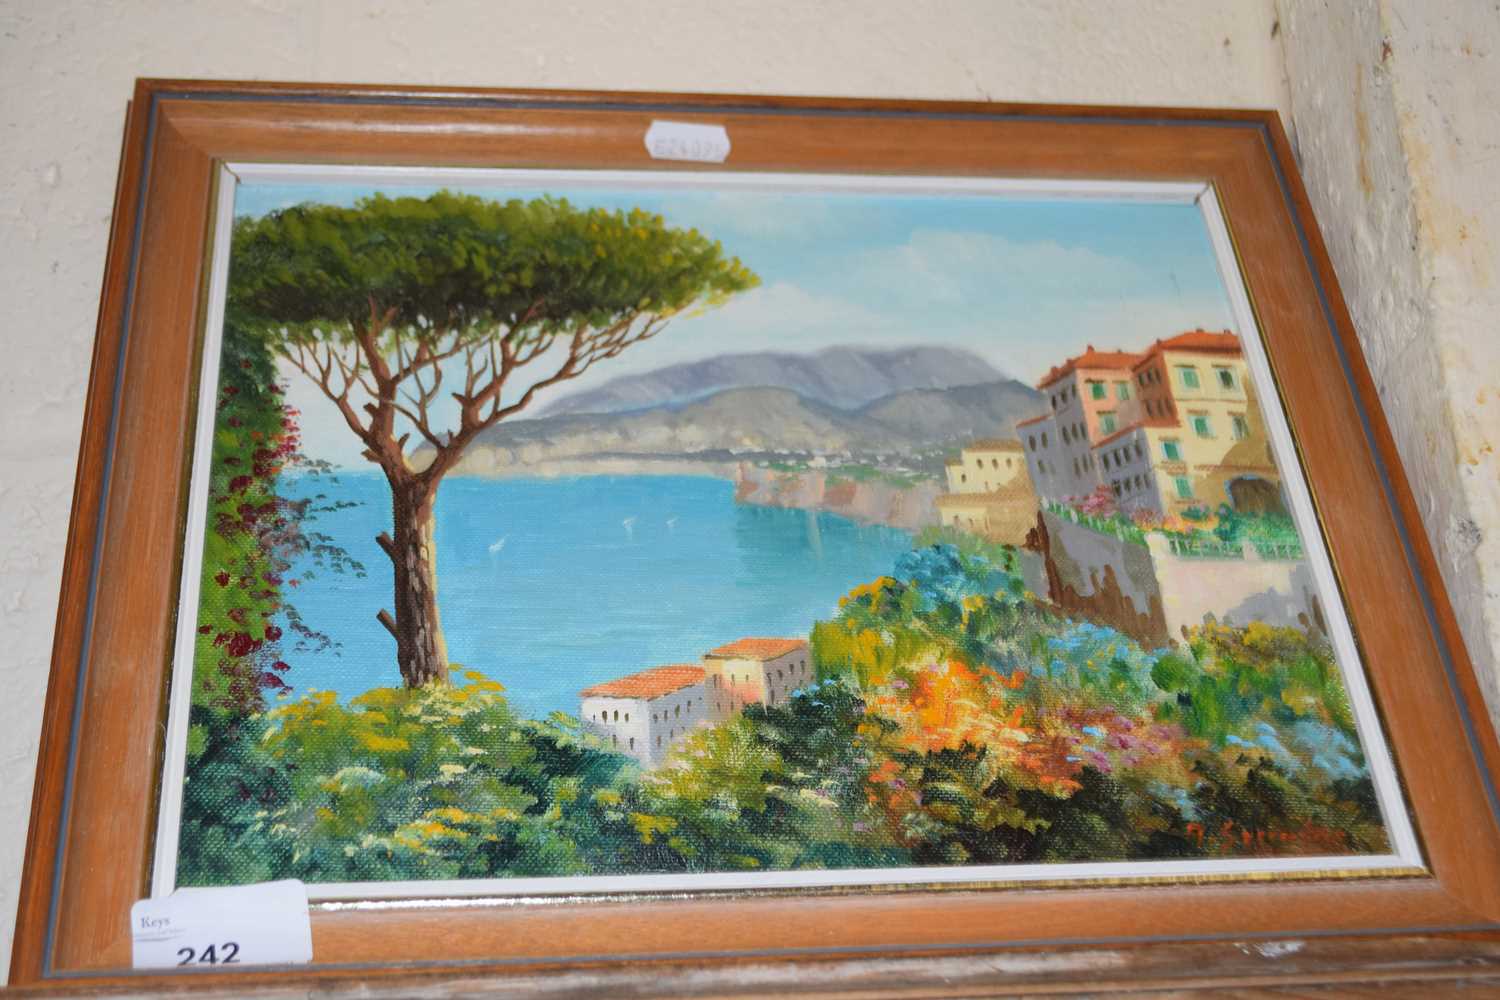 CONTINENTAL CONTEMPORARY STUDY OF A ITALIAN BAY SCENE, OIL ON BOARD, INDISTINCTLY SIGNED